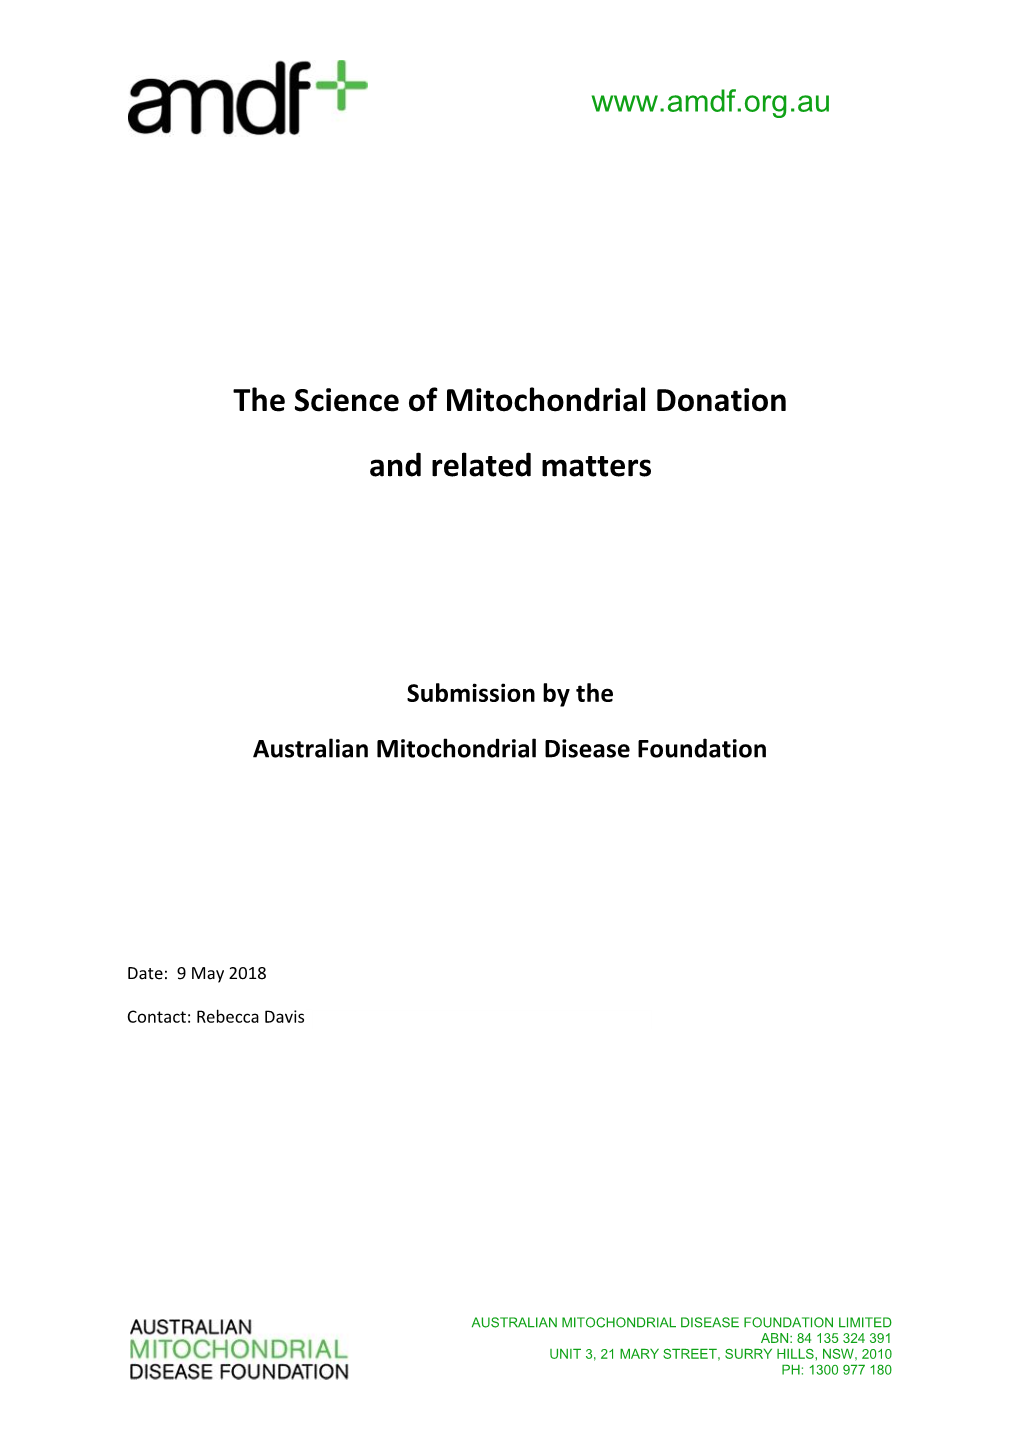 The Science of Mitochondrial Donation and Related Matters